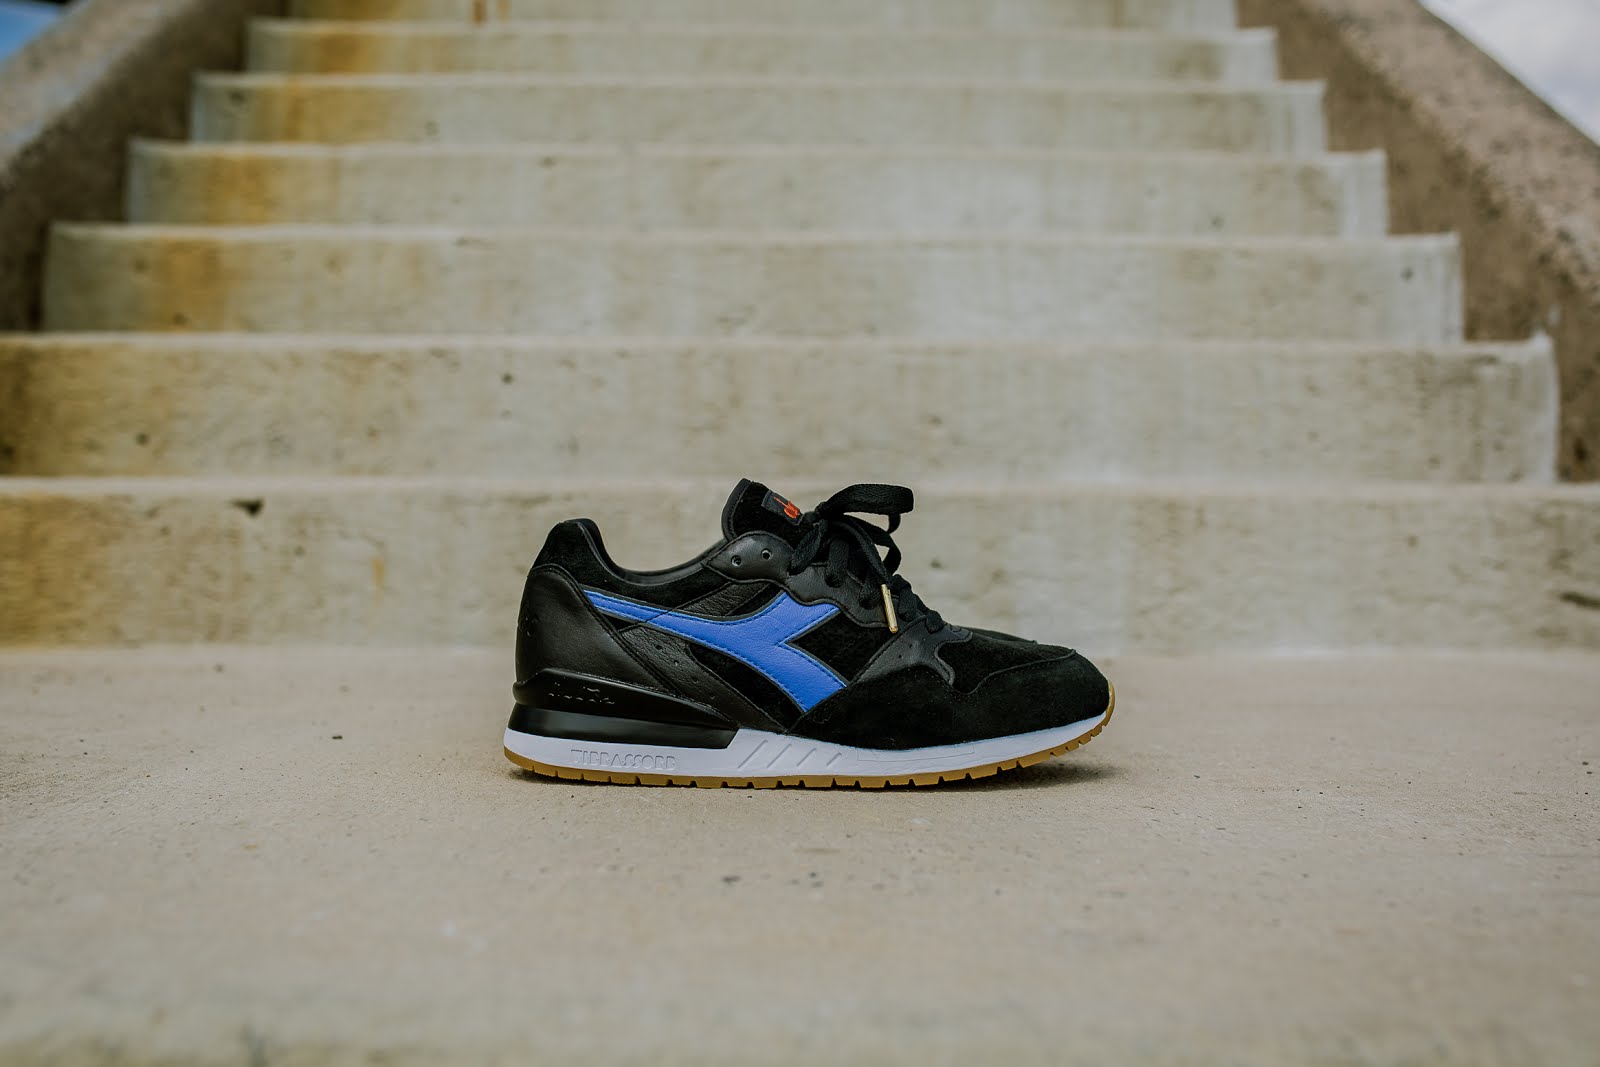 Packer Shoes x Diadora Intrepid From Seoul to Rio Release Date